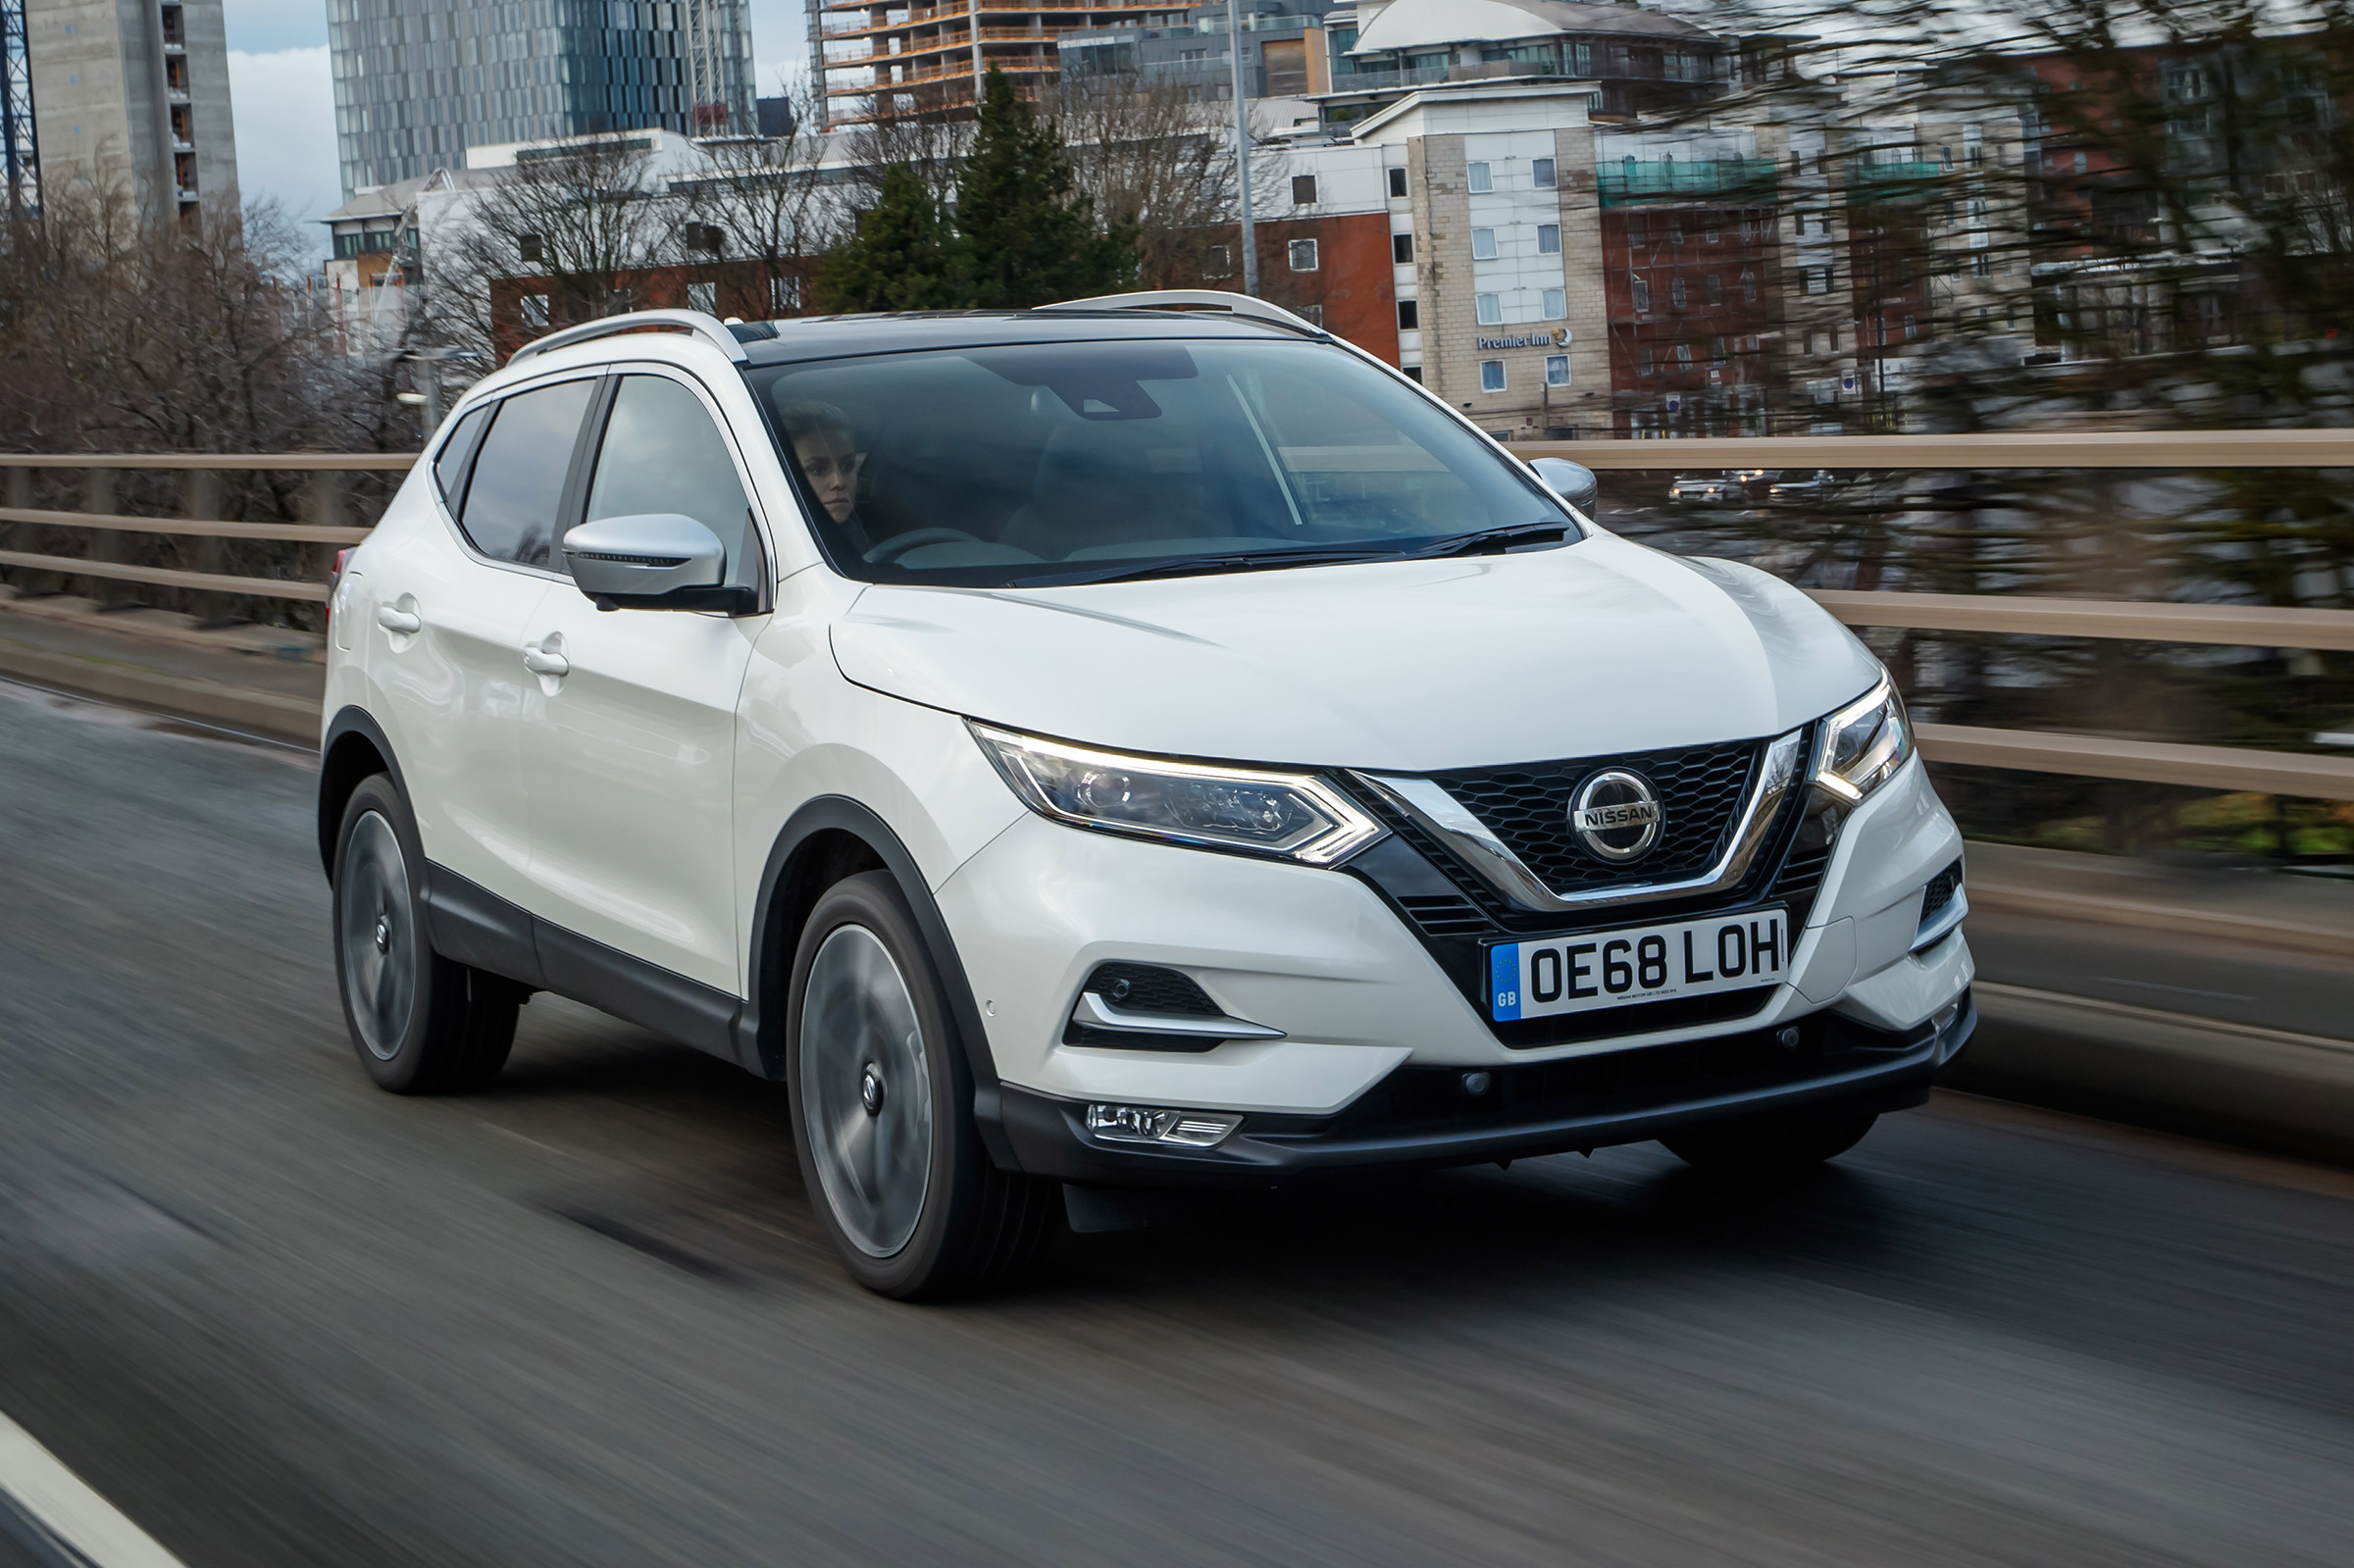 New Nissan Qashqai facelift 2019 review Auto Express